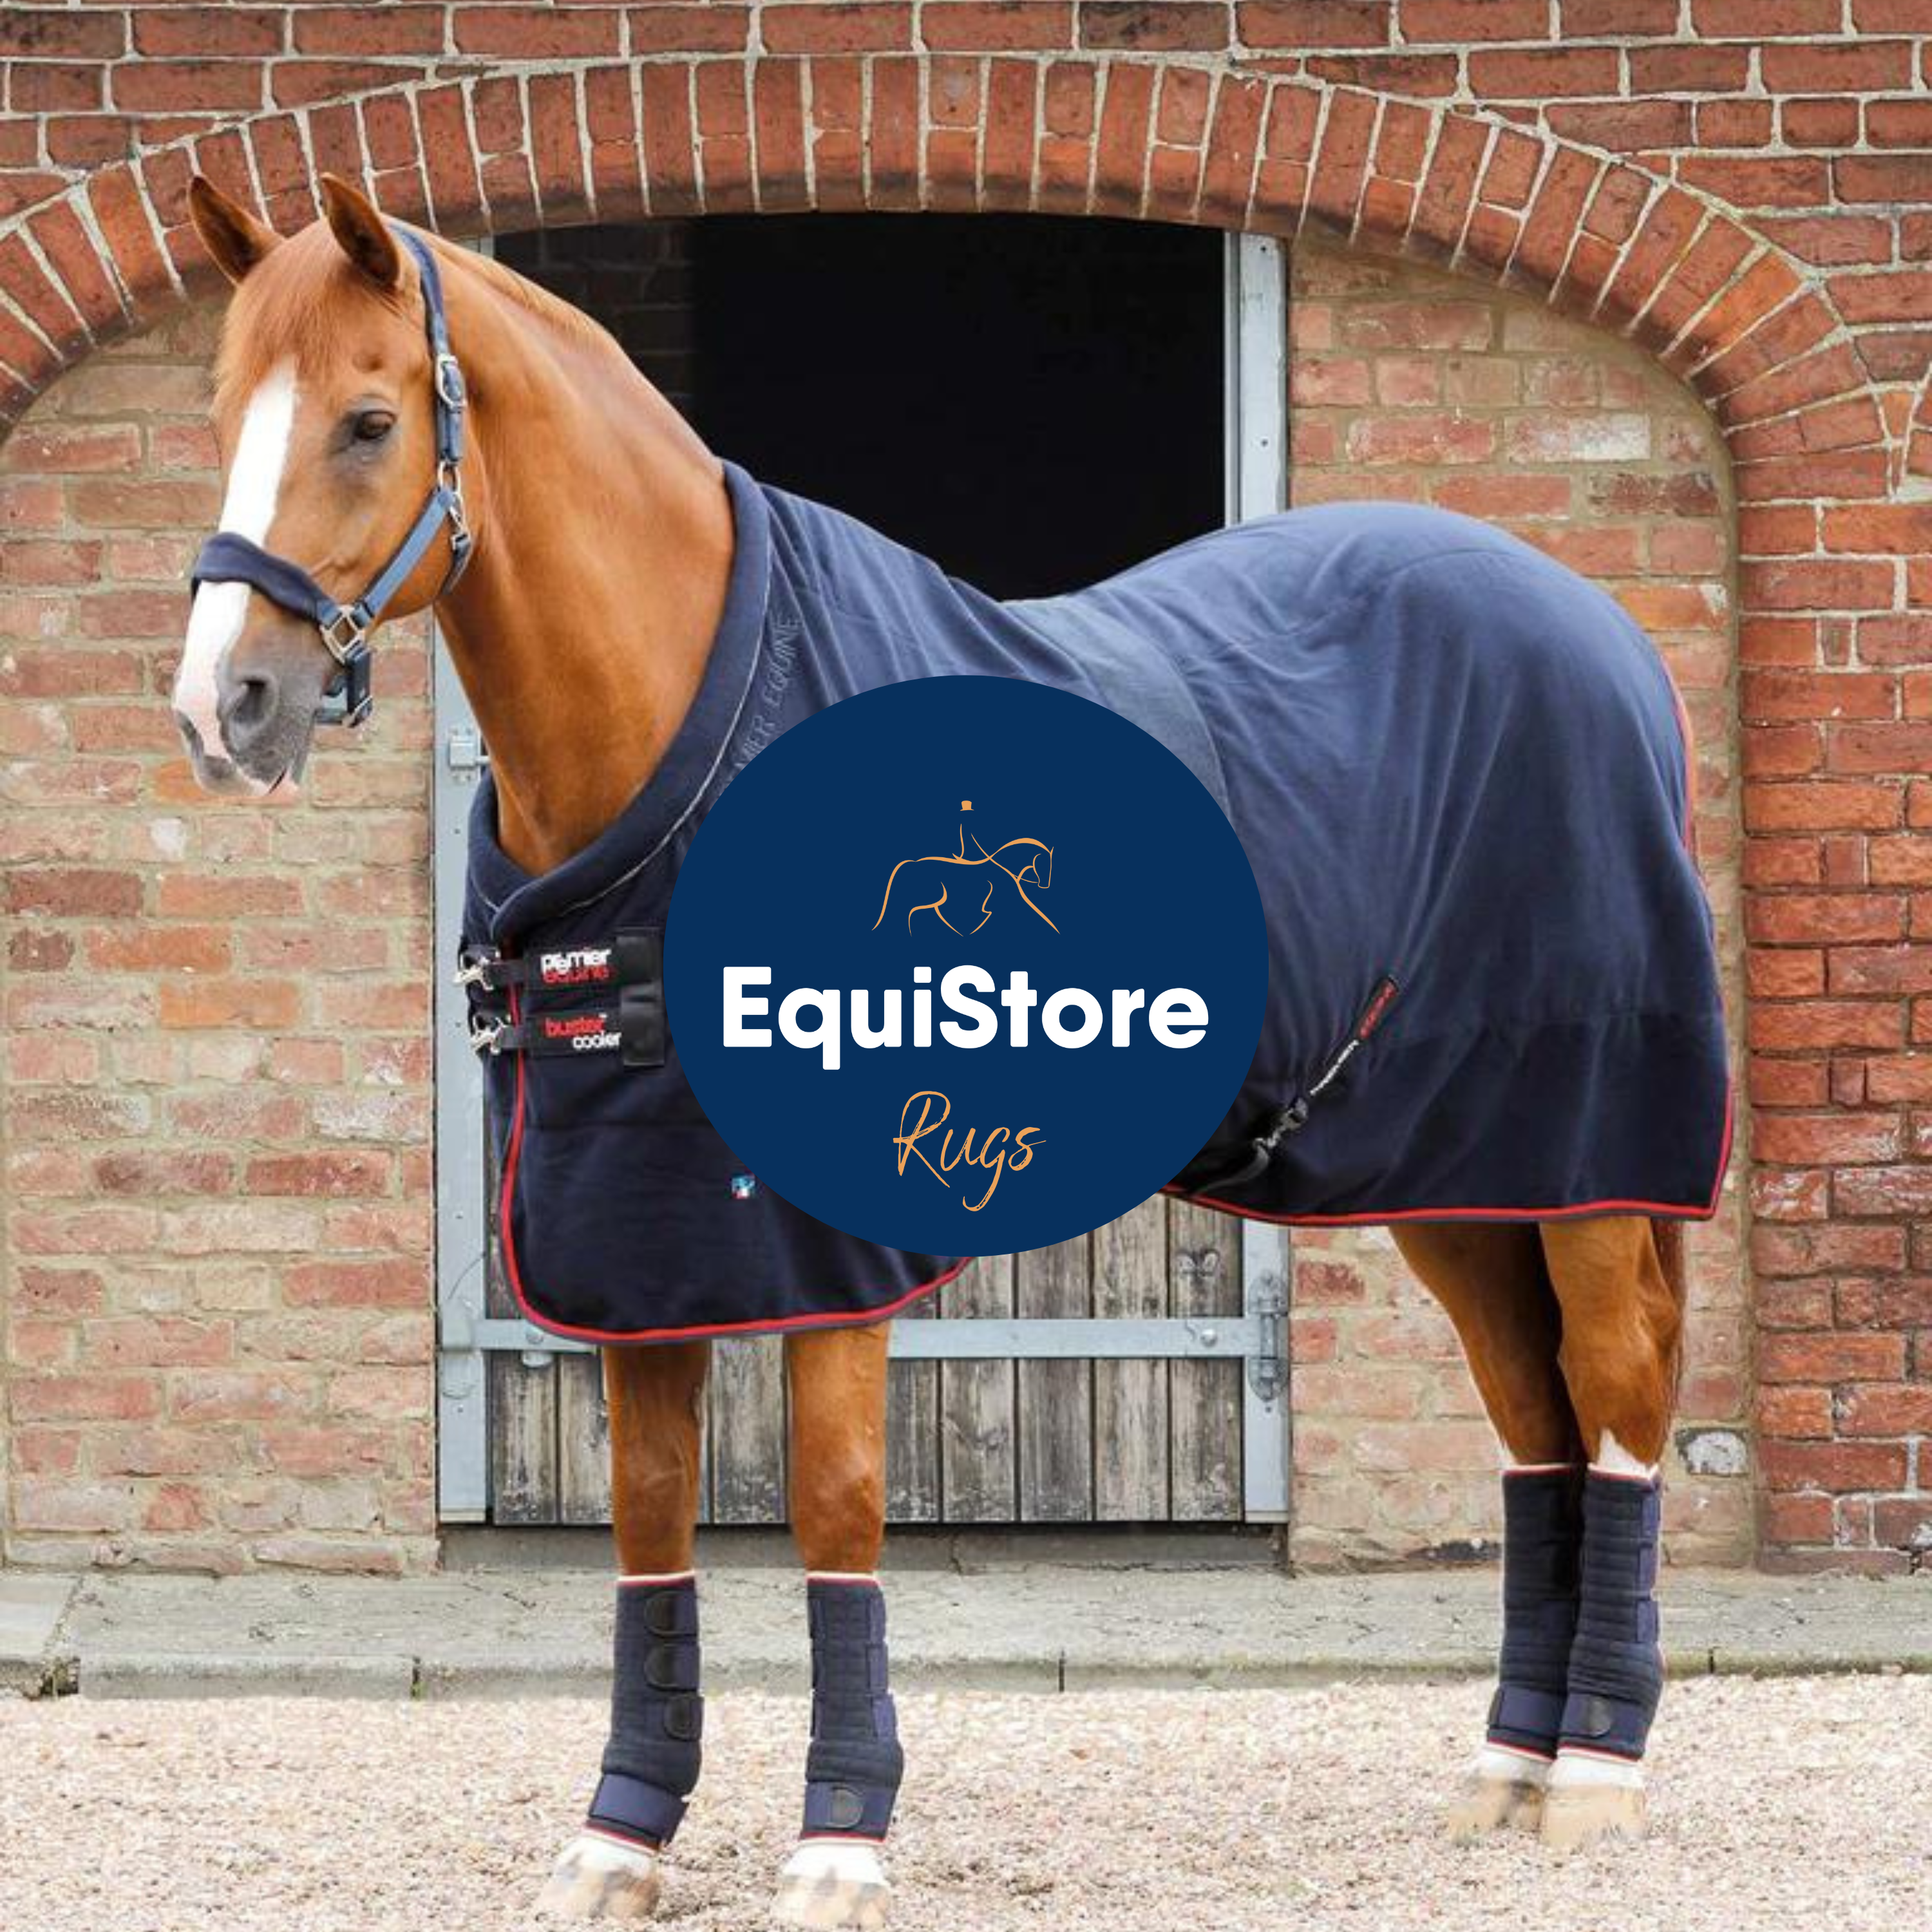 A wide range of horse rigs, including stable rugs, outdoor rugs, travel rugs and exercise sheets available in Ireland at Equistore.